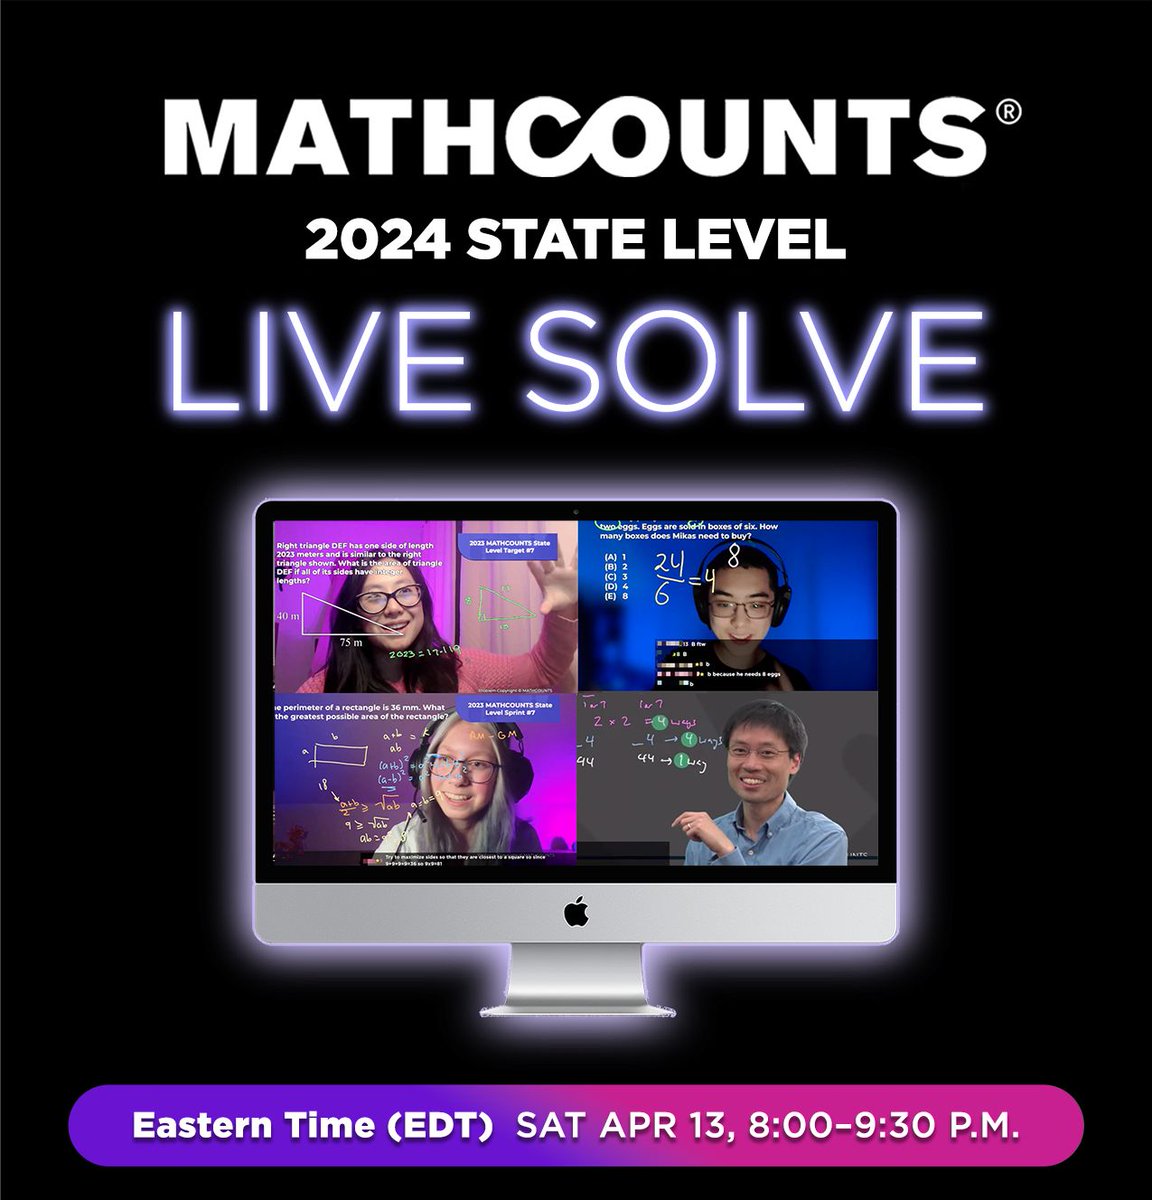 Join @PoShenLoh's team of alumni tomorrow as they solve the 2024 MATHCOUNTS State Competition during an interactive livestream! Sign up here: live.poshenloh.com/2024-mathcount…